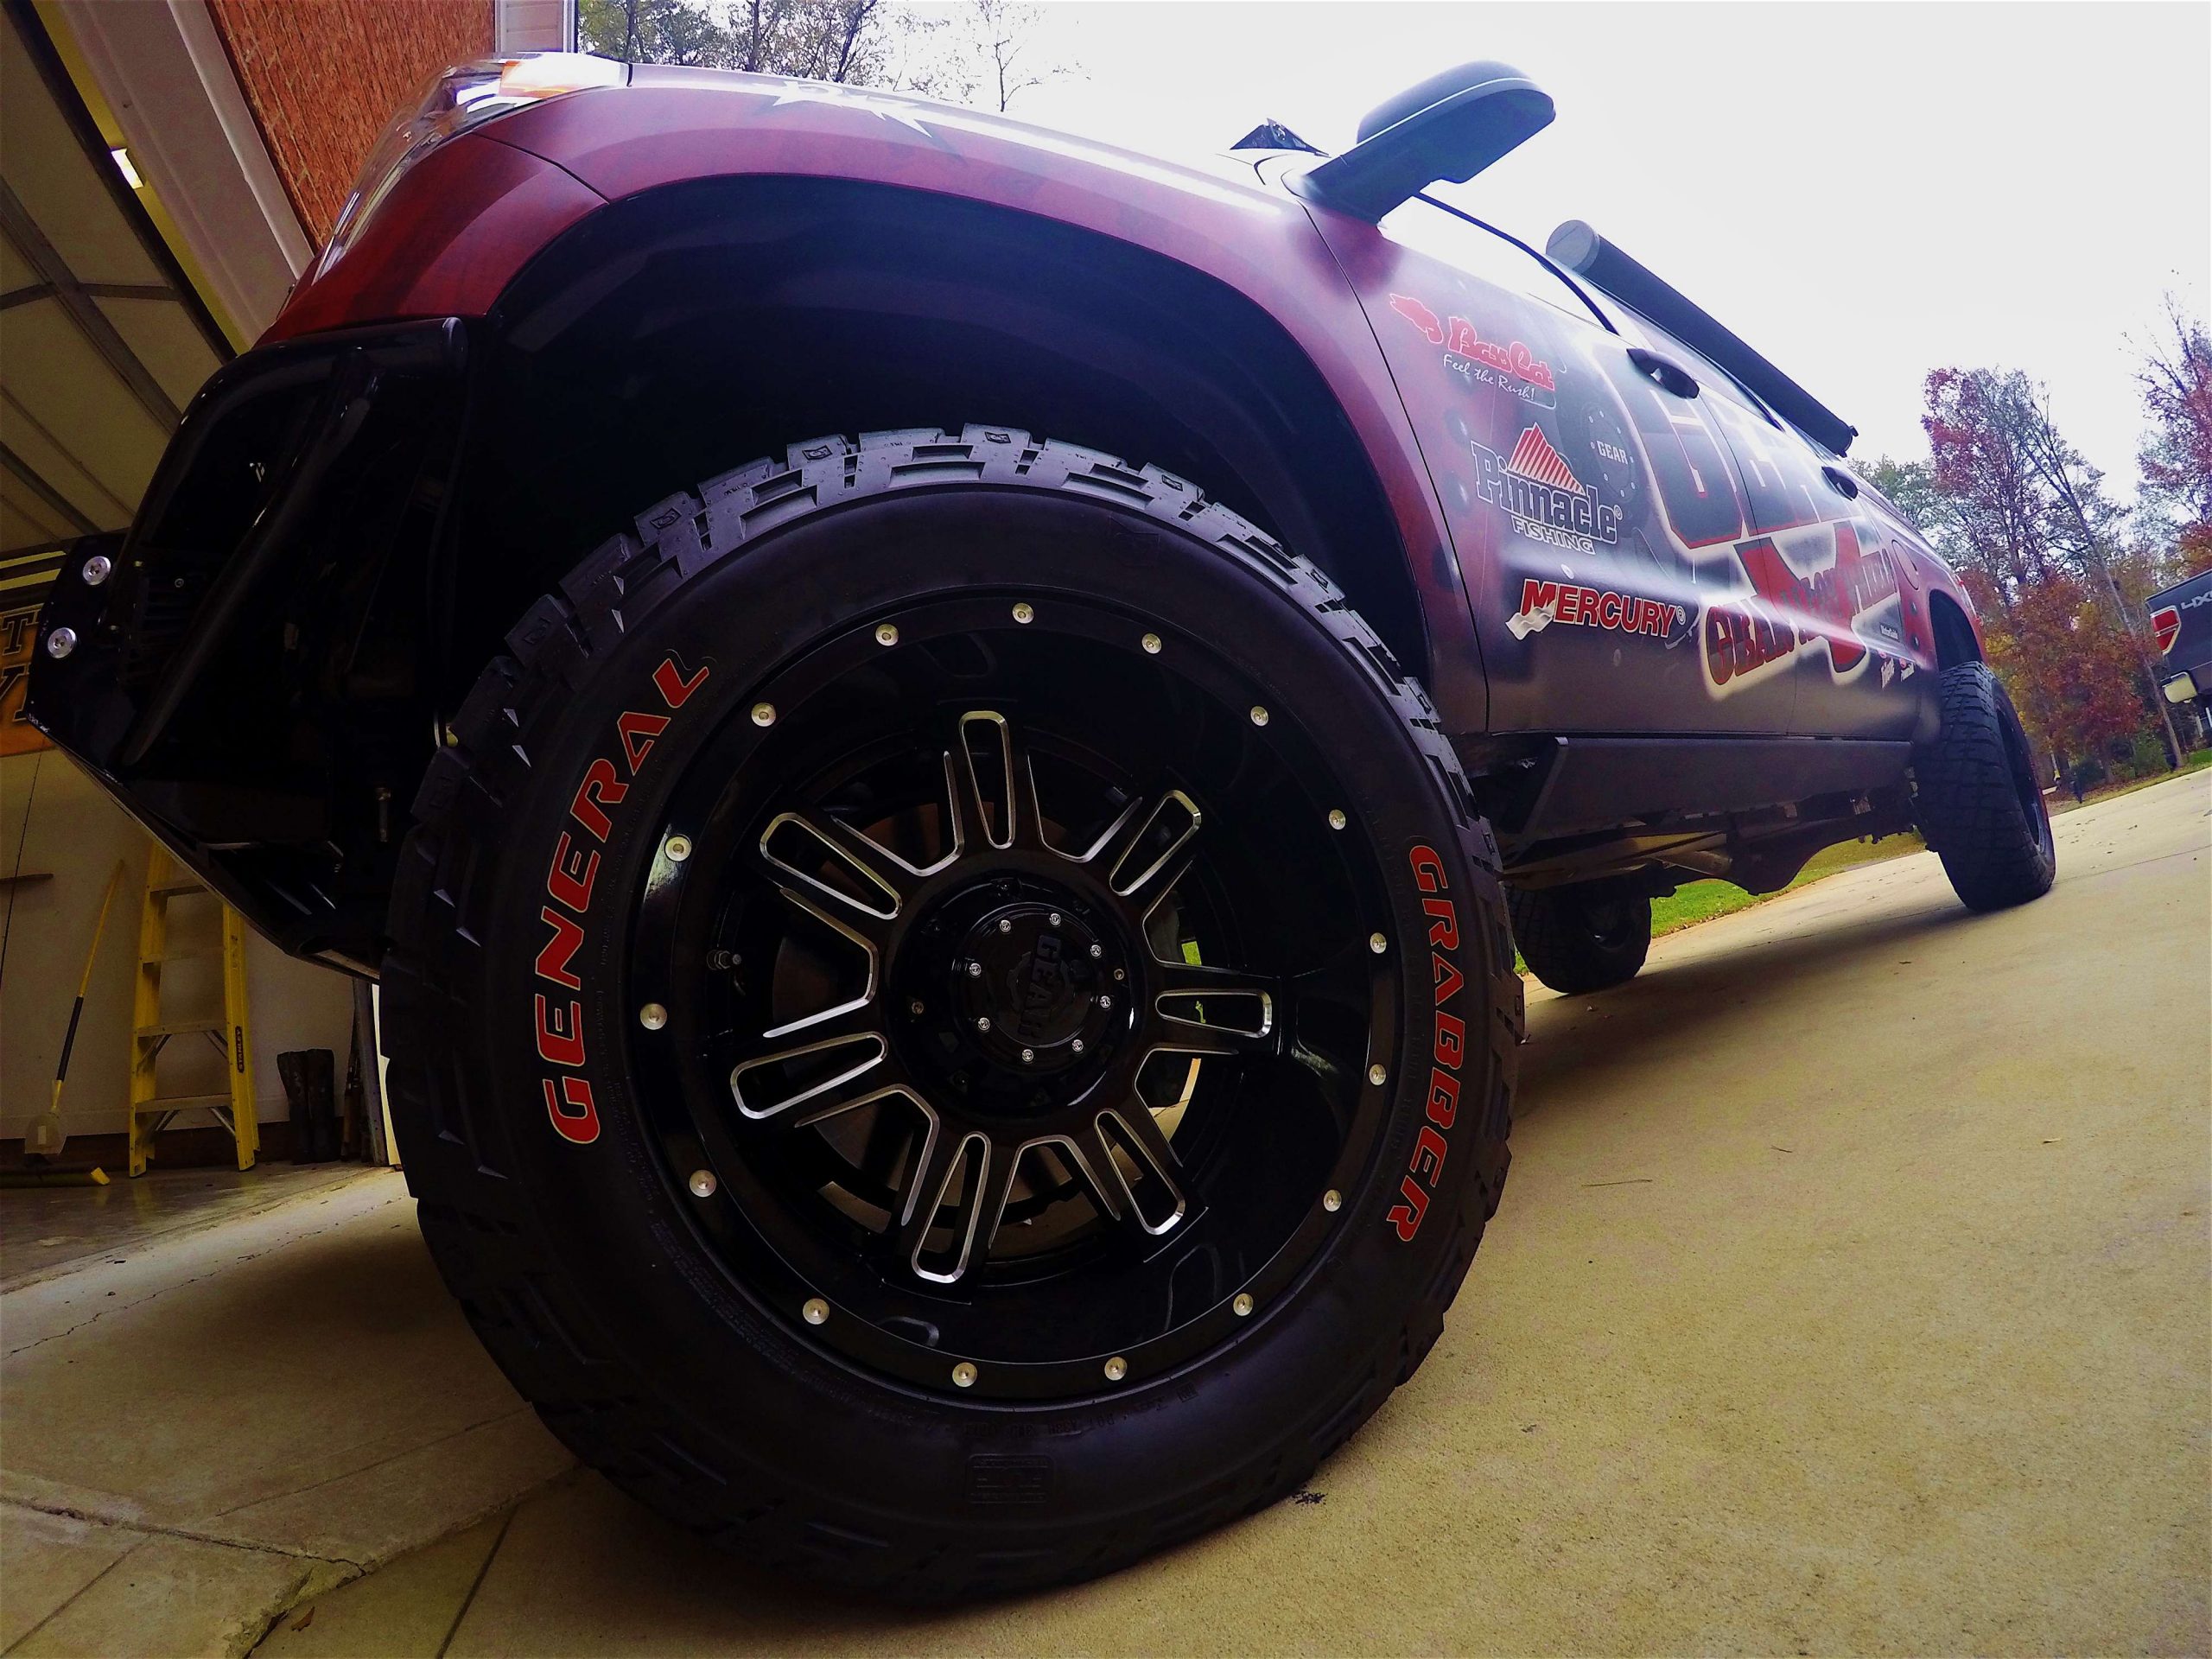 Big wheels and tires are a must also. But to add them, a lift kit is required.